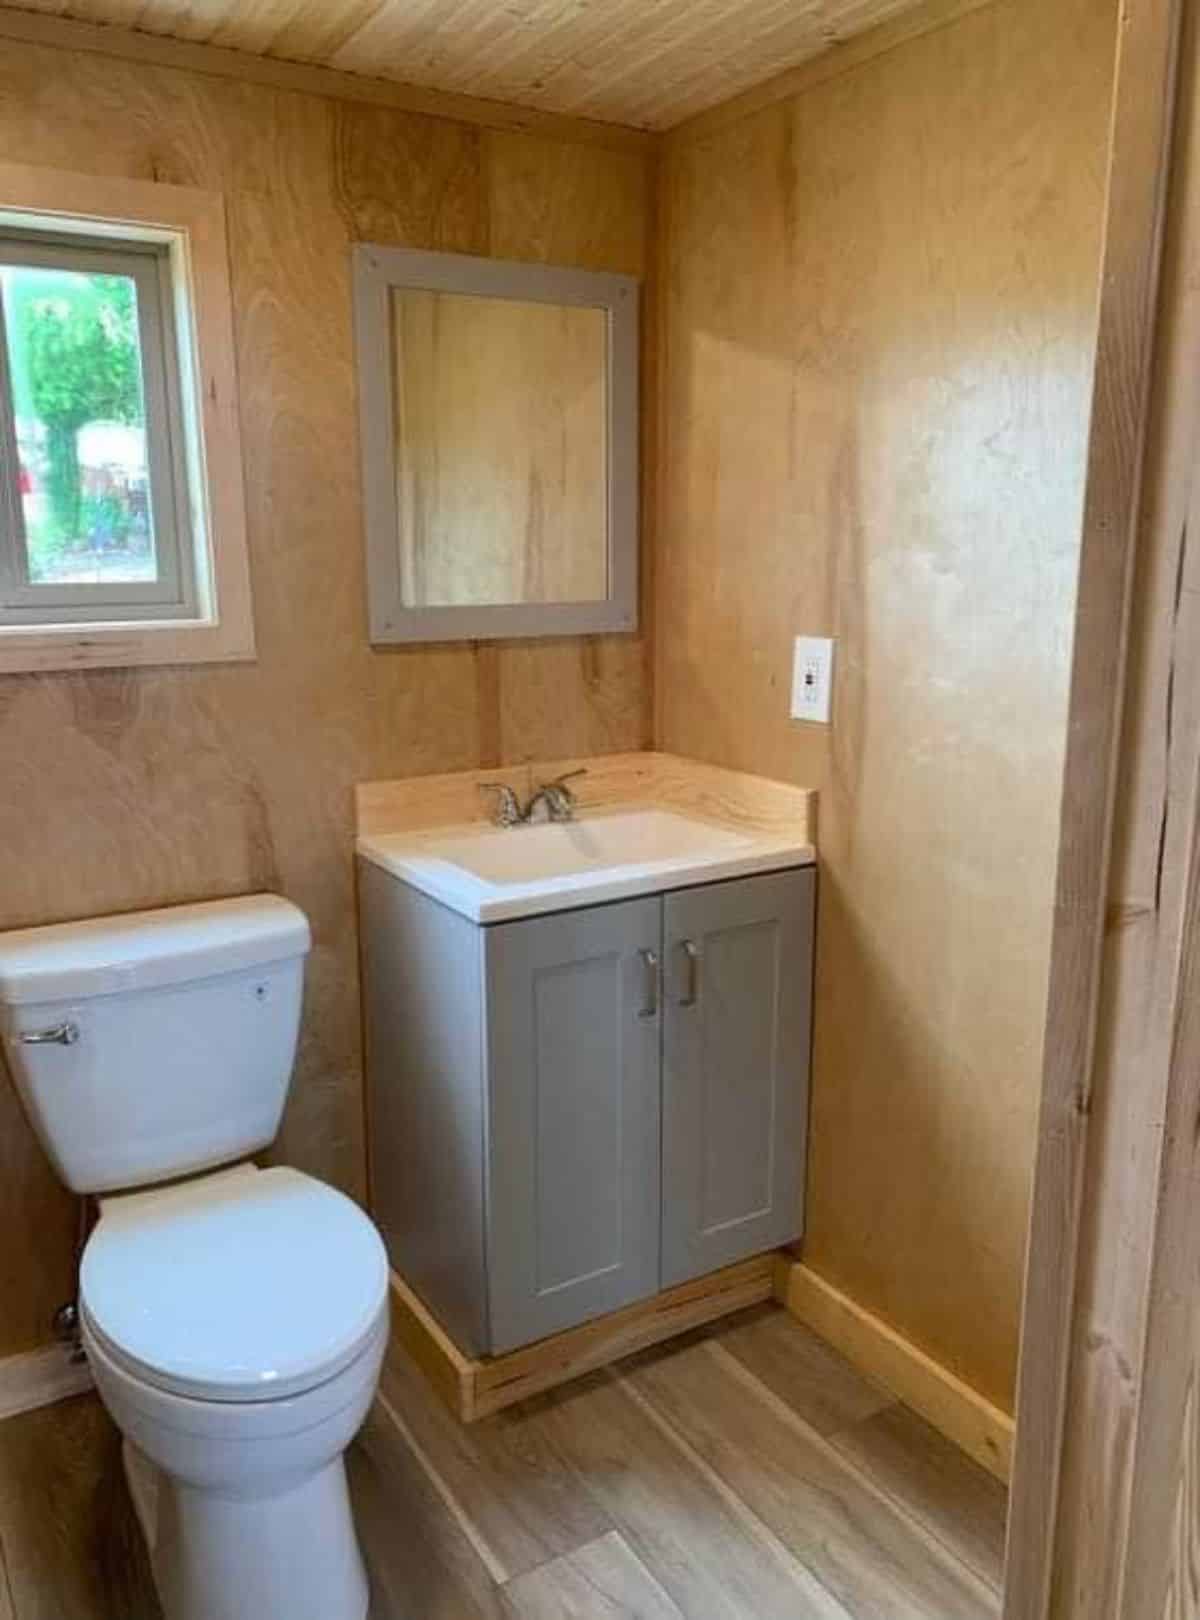 standard fittings in bathroom of handcrafted tiny home